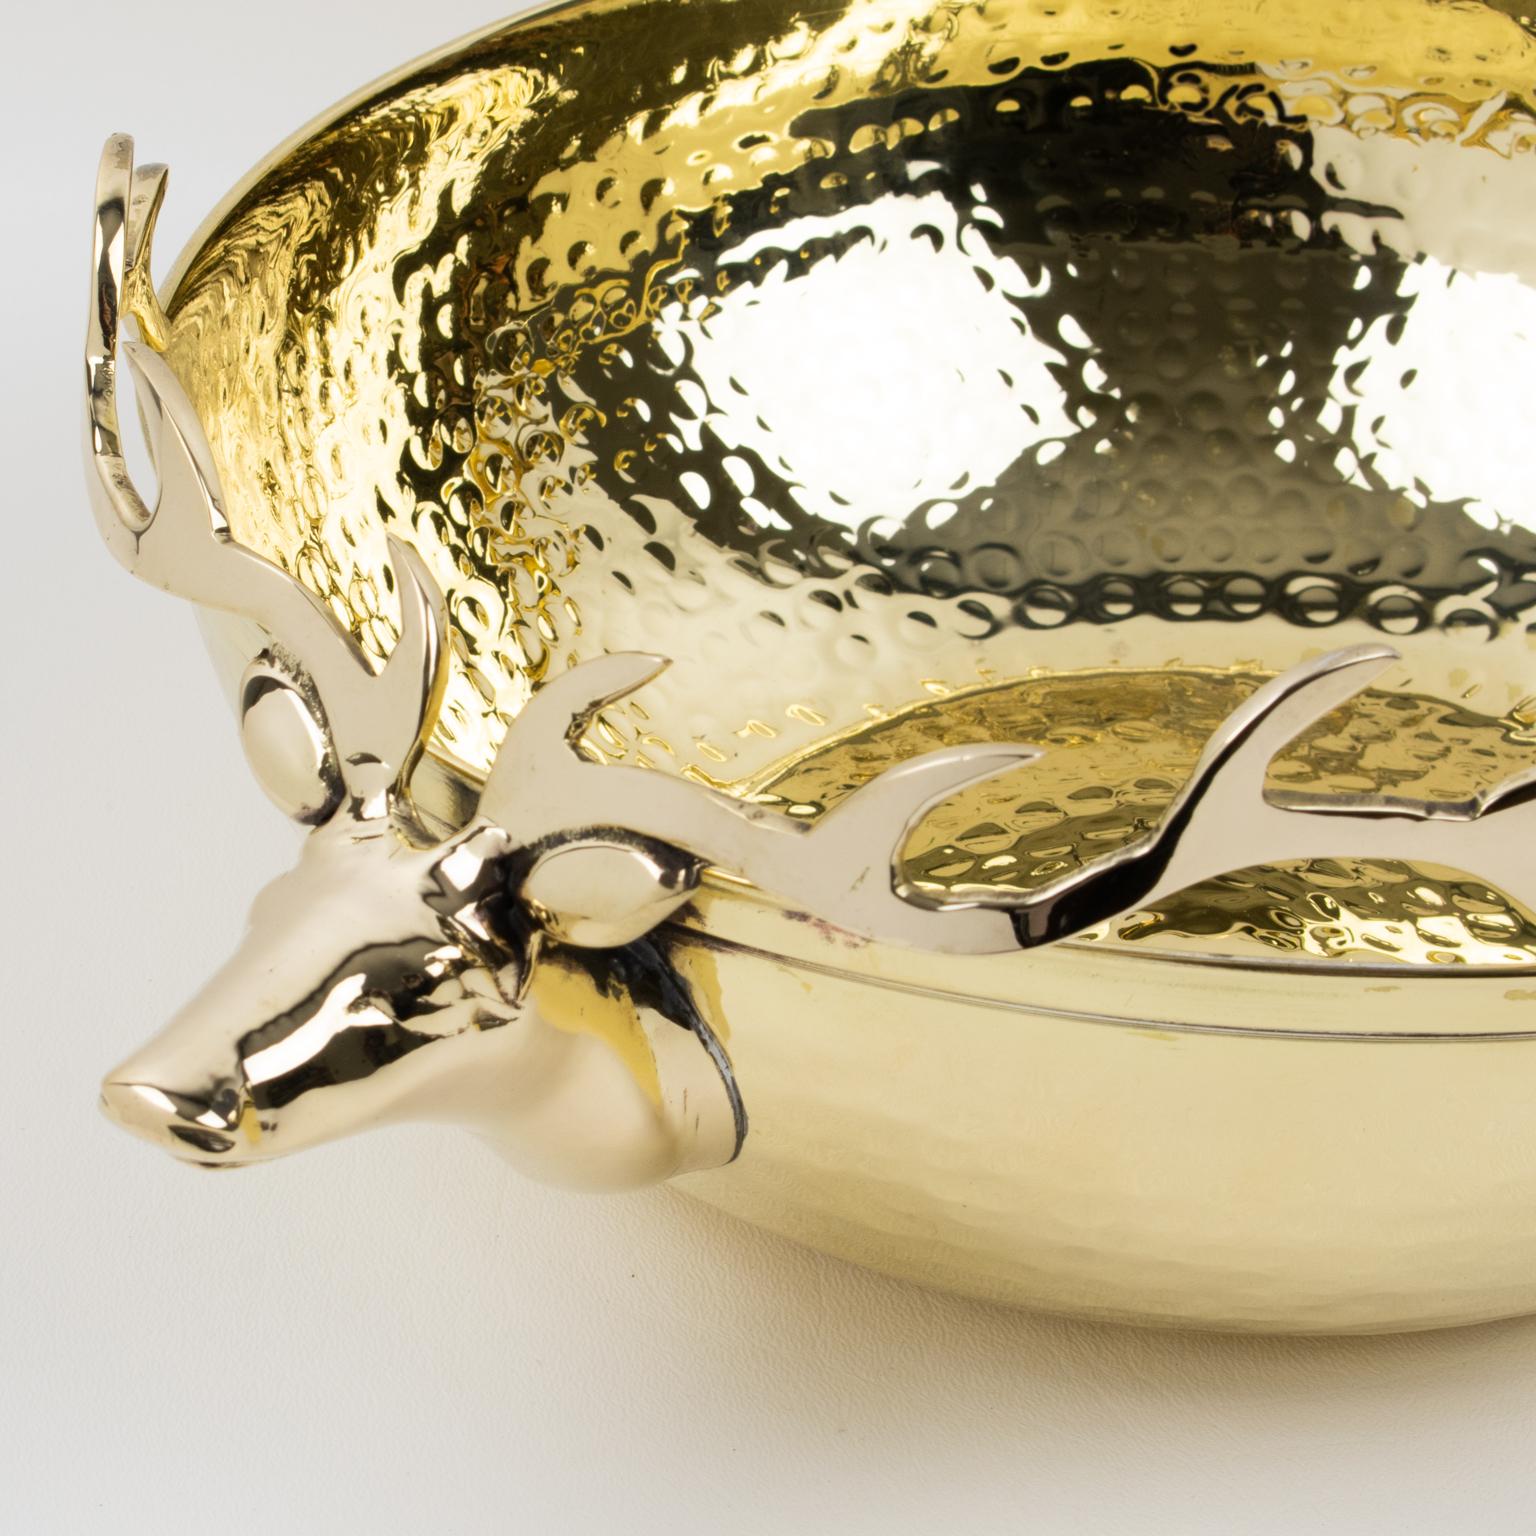 Modern Brass Bowl Decorative Centerpiece with Stag Heads Handles, Italy 1980s For Sale